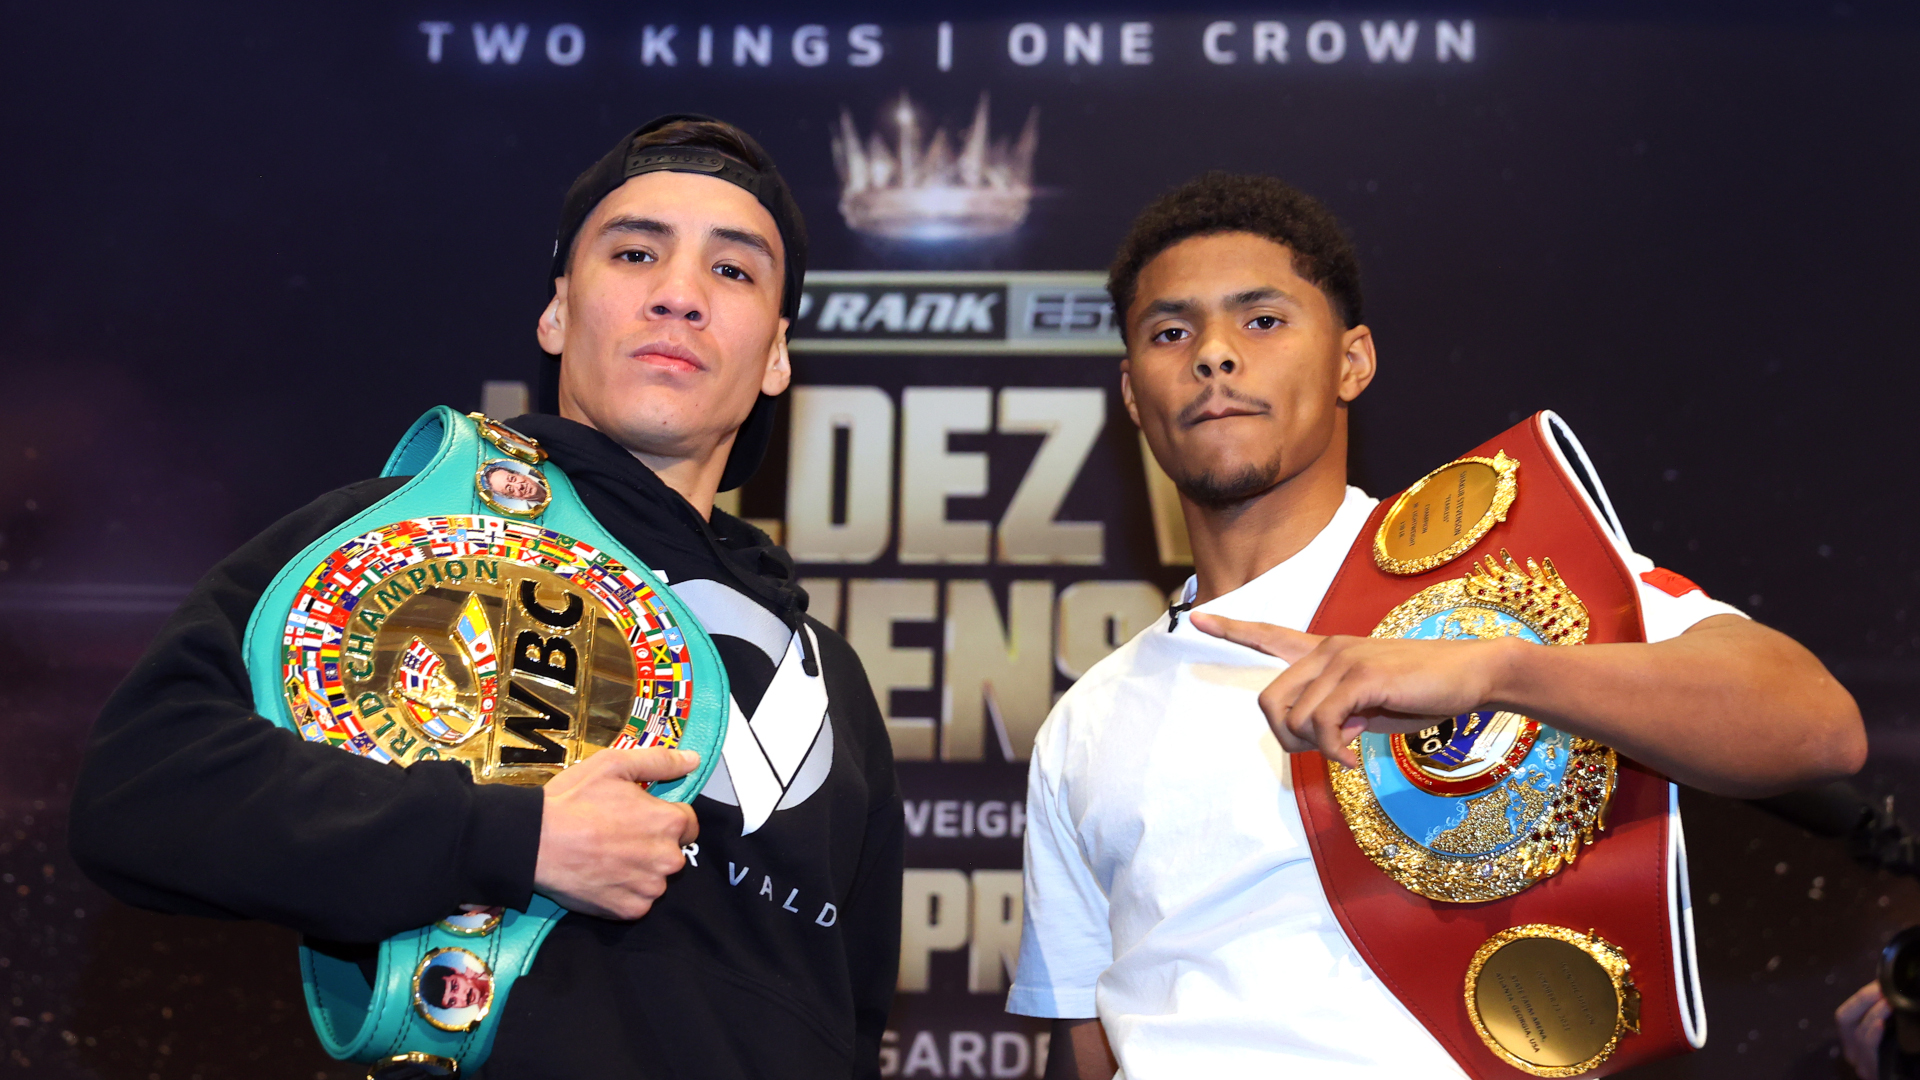 Oscar Valdez vs Shakur Stevenson live stream and how to watch boxing free online and on TV, full fight What Hi-Fi?